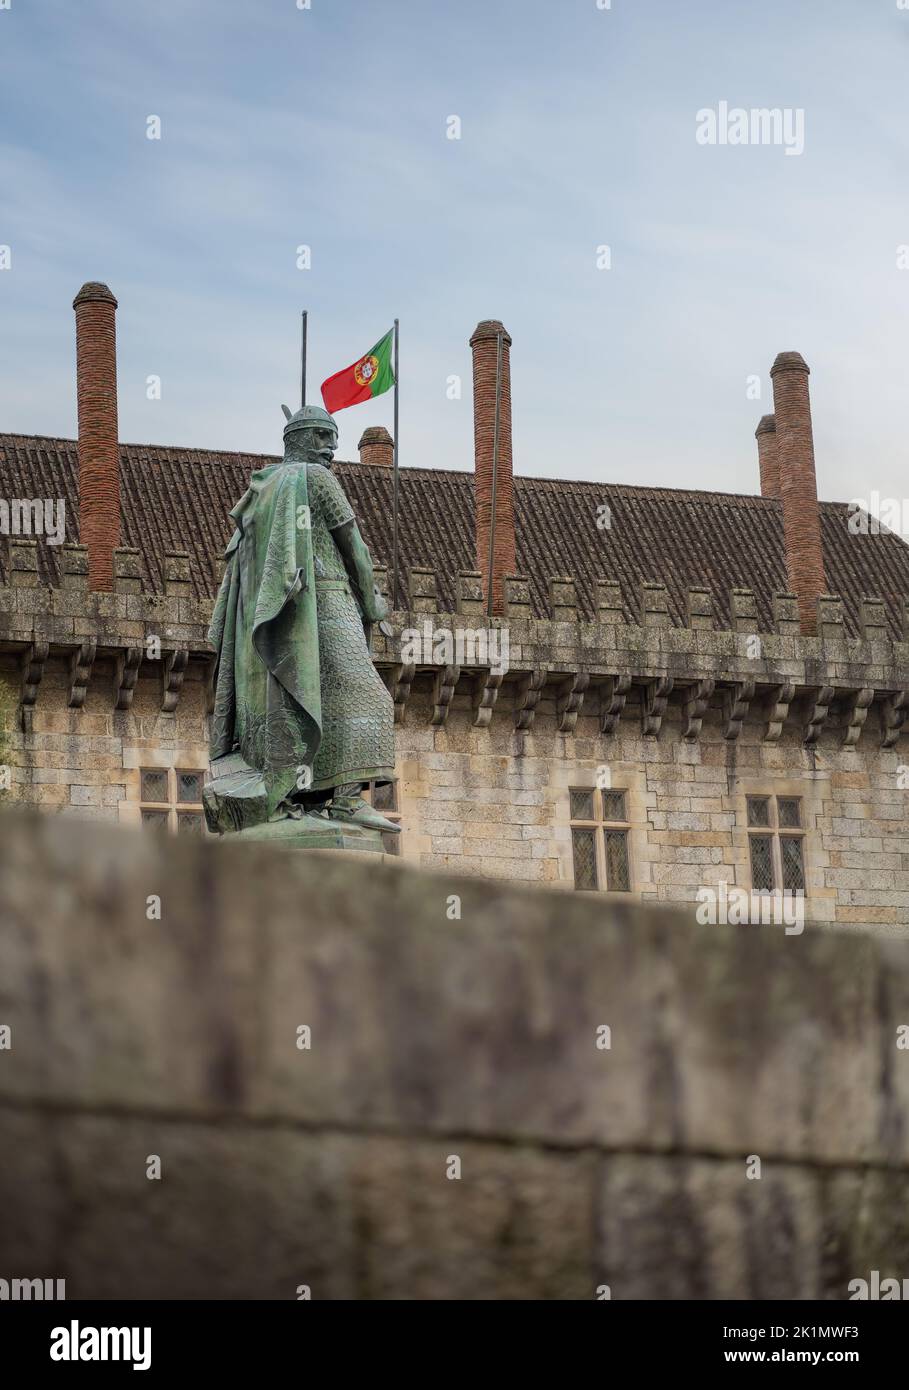 King Afonso Henriques Statue (Afonso I of Portugal) and Portuguese Flag, sculpted by Soares dos Reis in 1887 - Guimaraes, Portugal Stock Photo